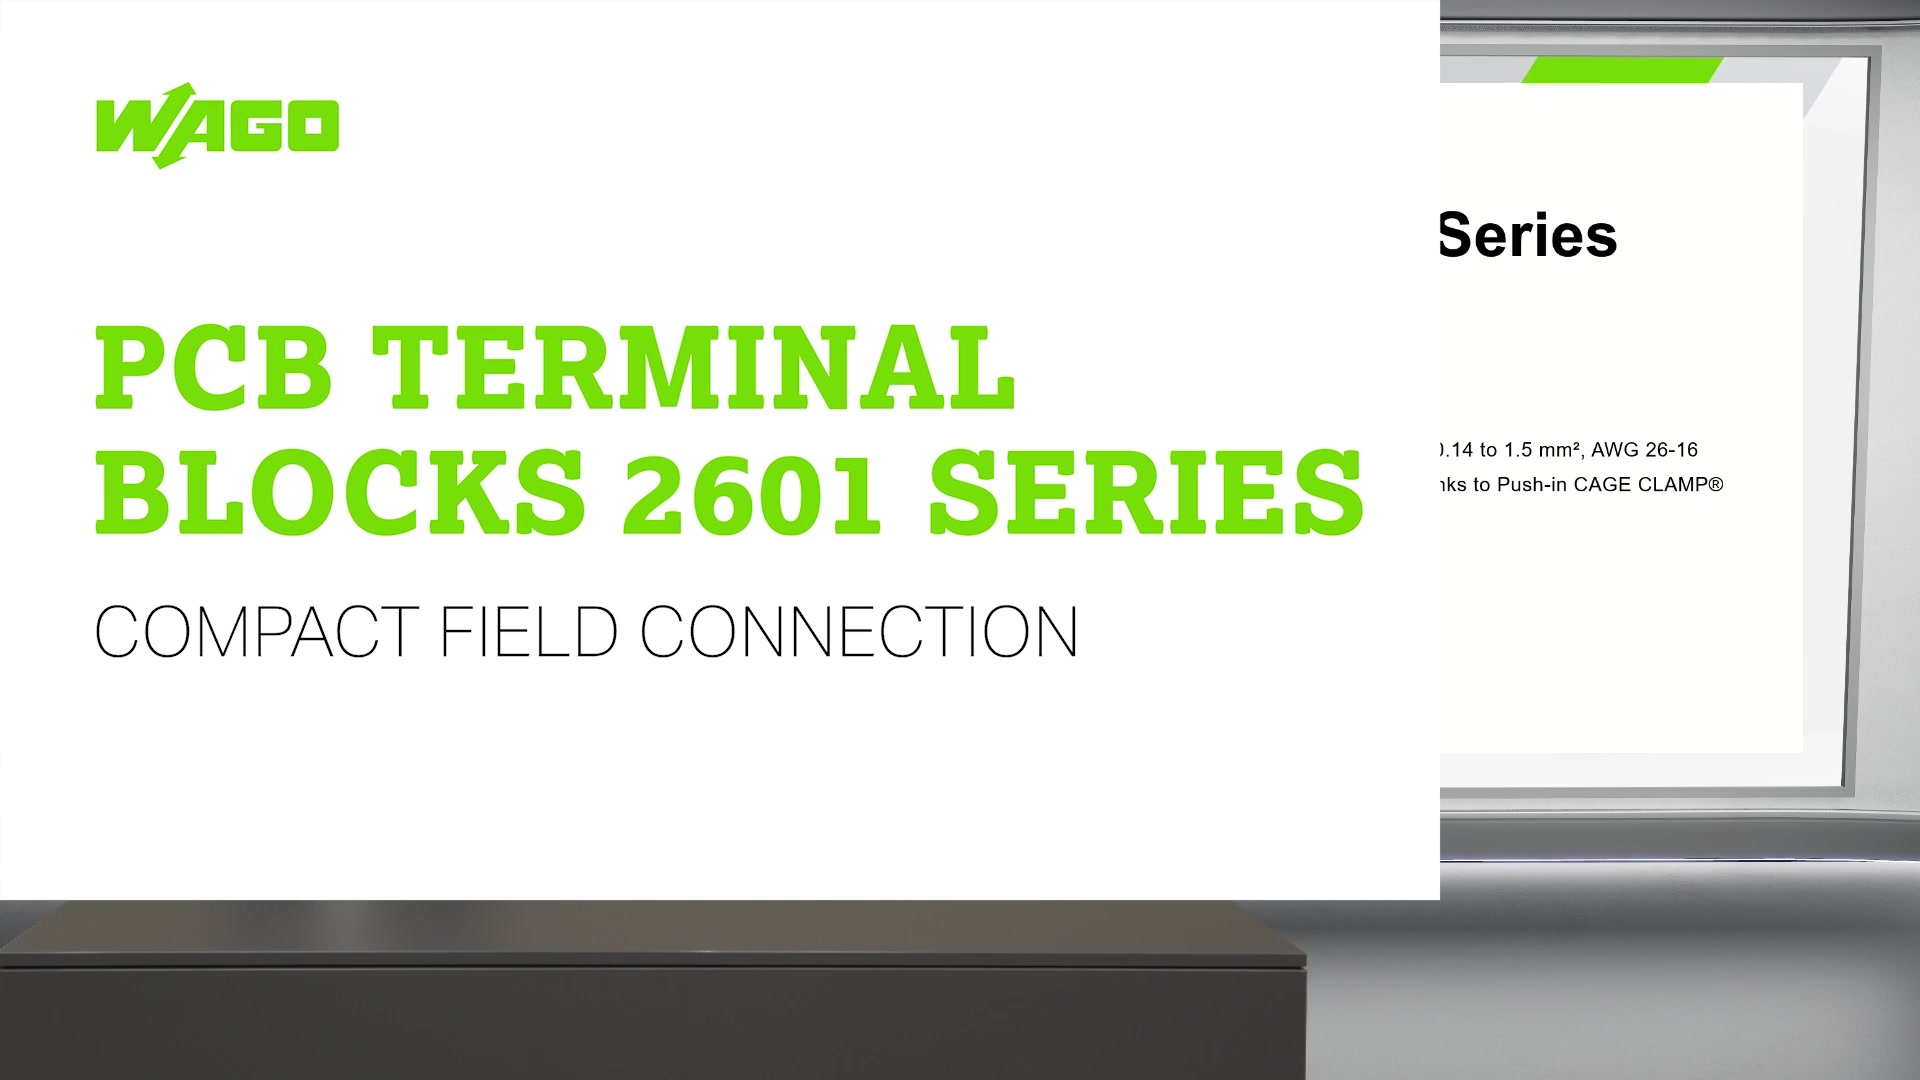 Compact Field Connection with the 2601 Series